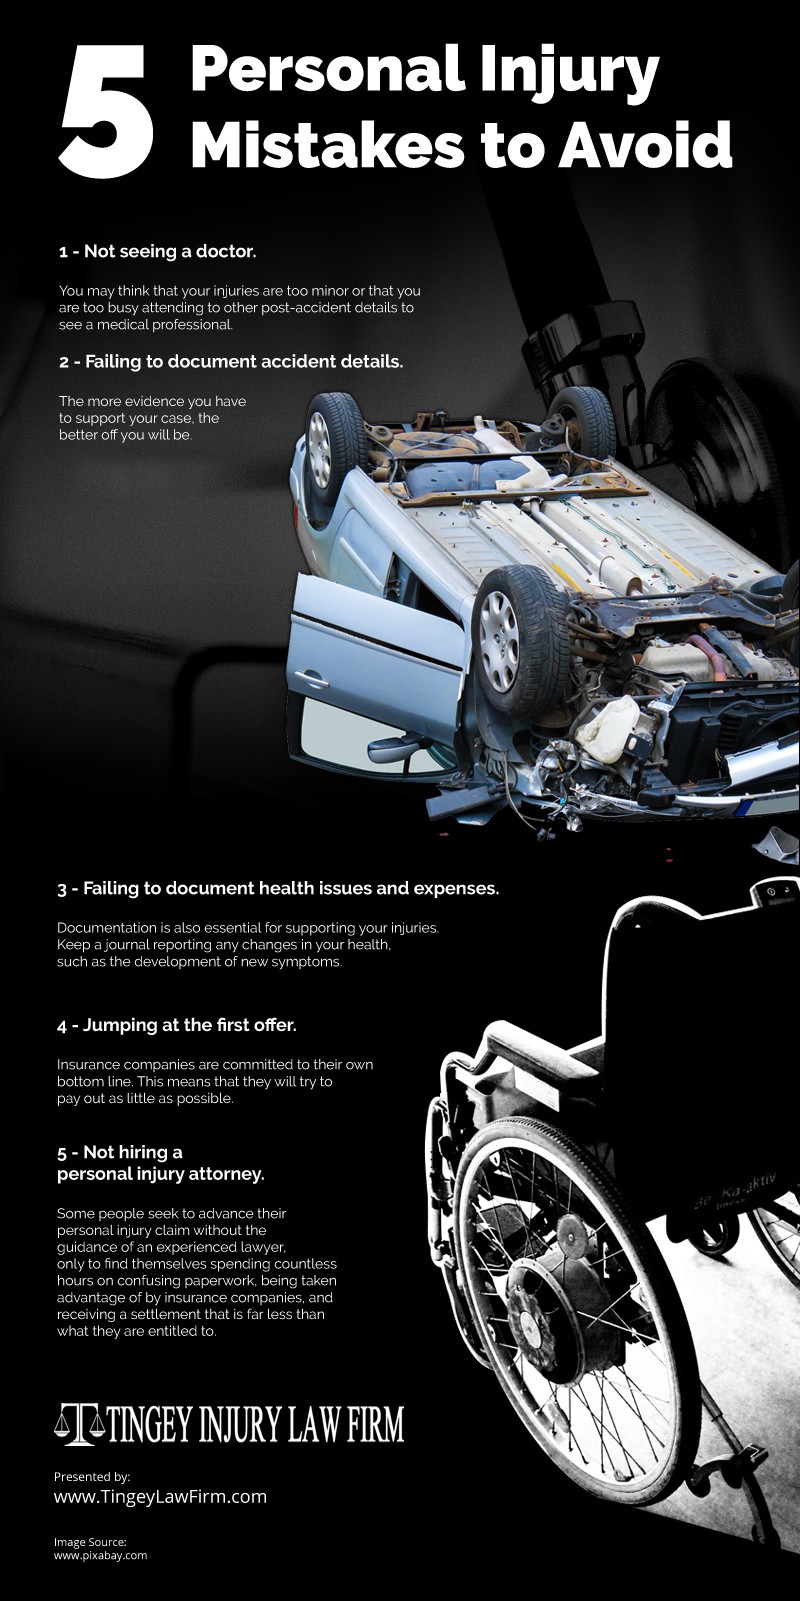 5 Personal Injury Mistakes to Avoid [infographic]